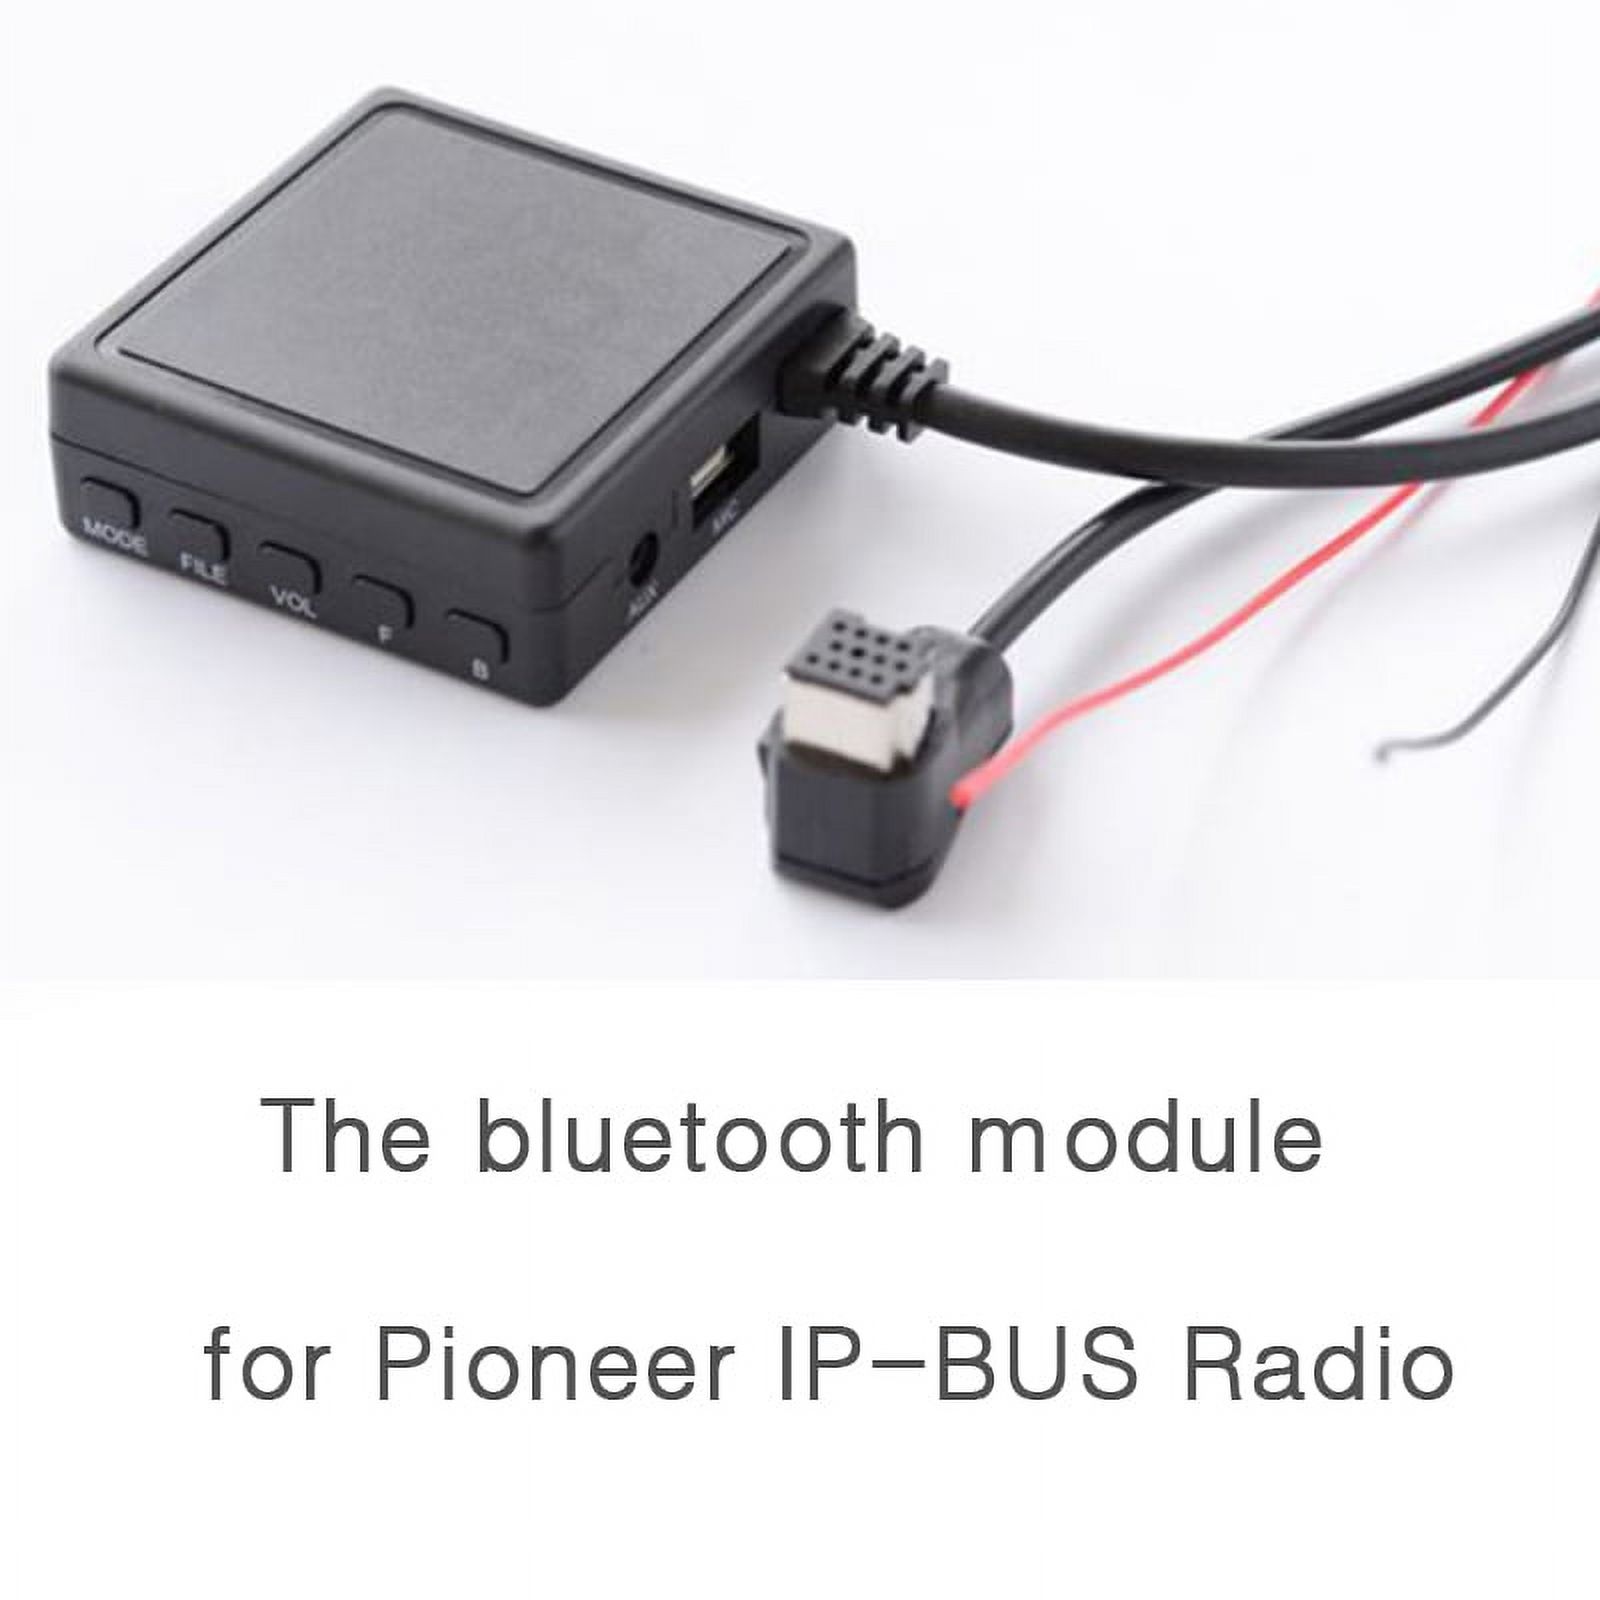 Car SUV 5.0 AUX USB Music Adapter Wireless Audio Cable For Pioneer IP-BUS Radio - image 5 of 5